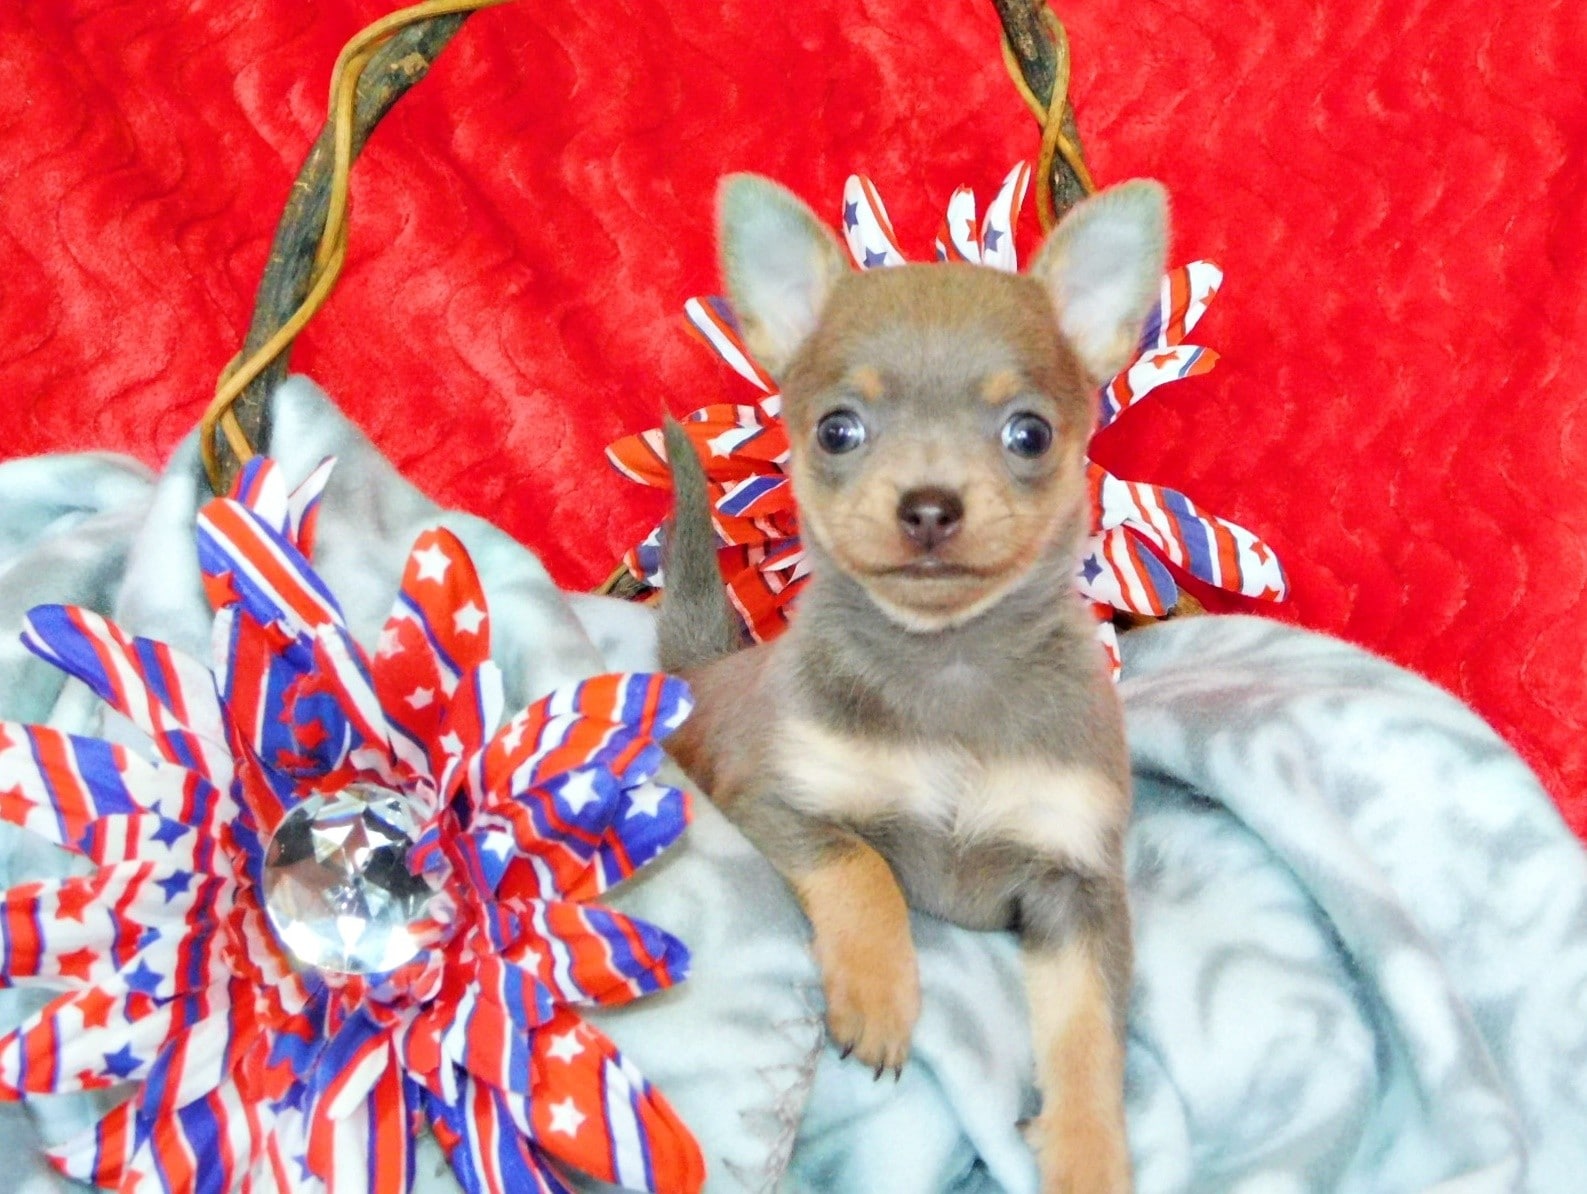 Lavender and tan Chihuahua puppy sitting in a basket with a red background and red, white and blue flowers.  Chihuahua puppies in Arkansas